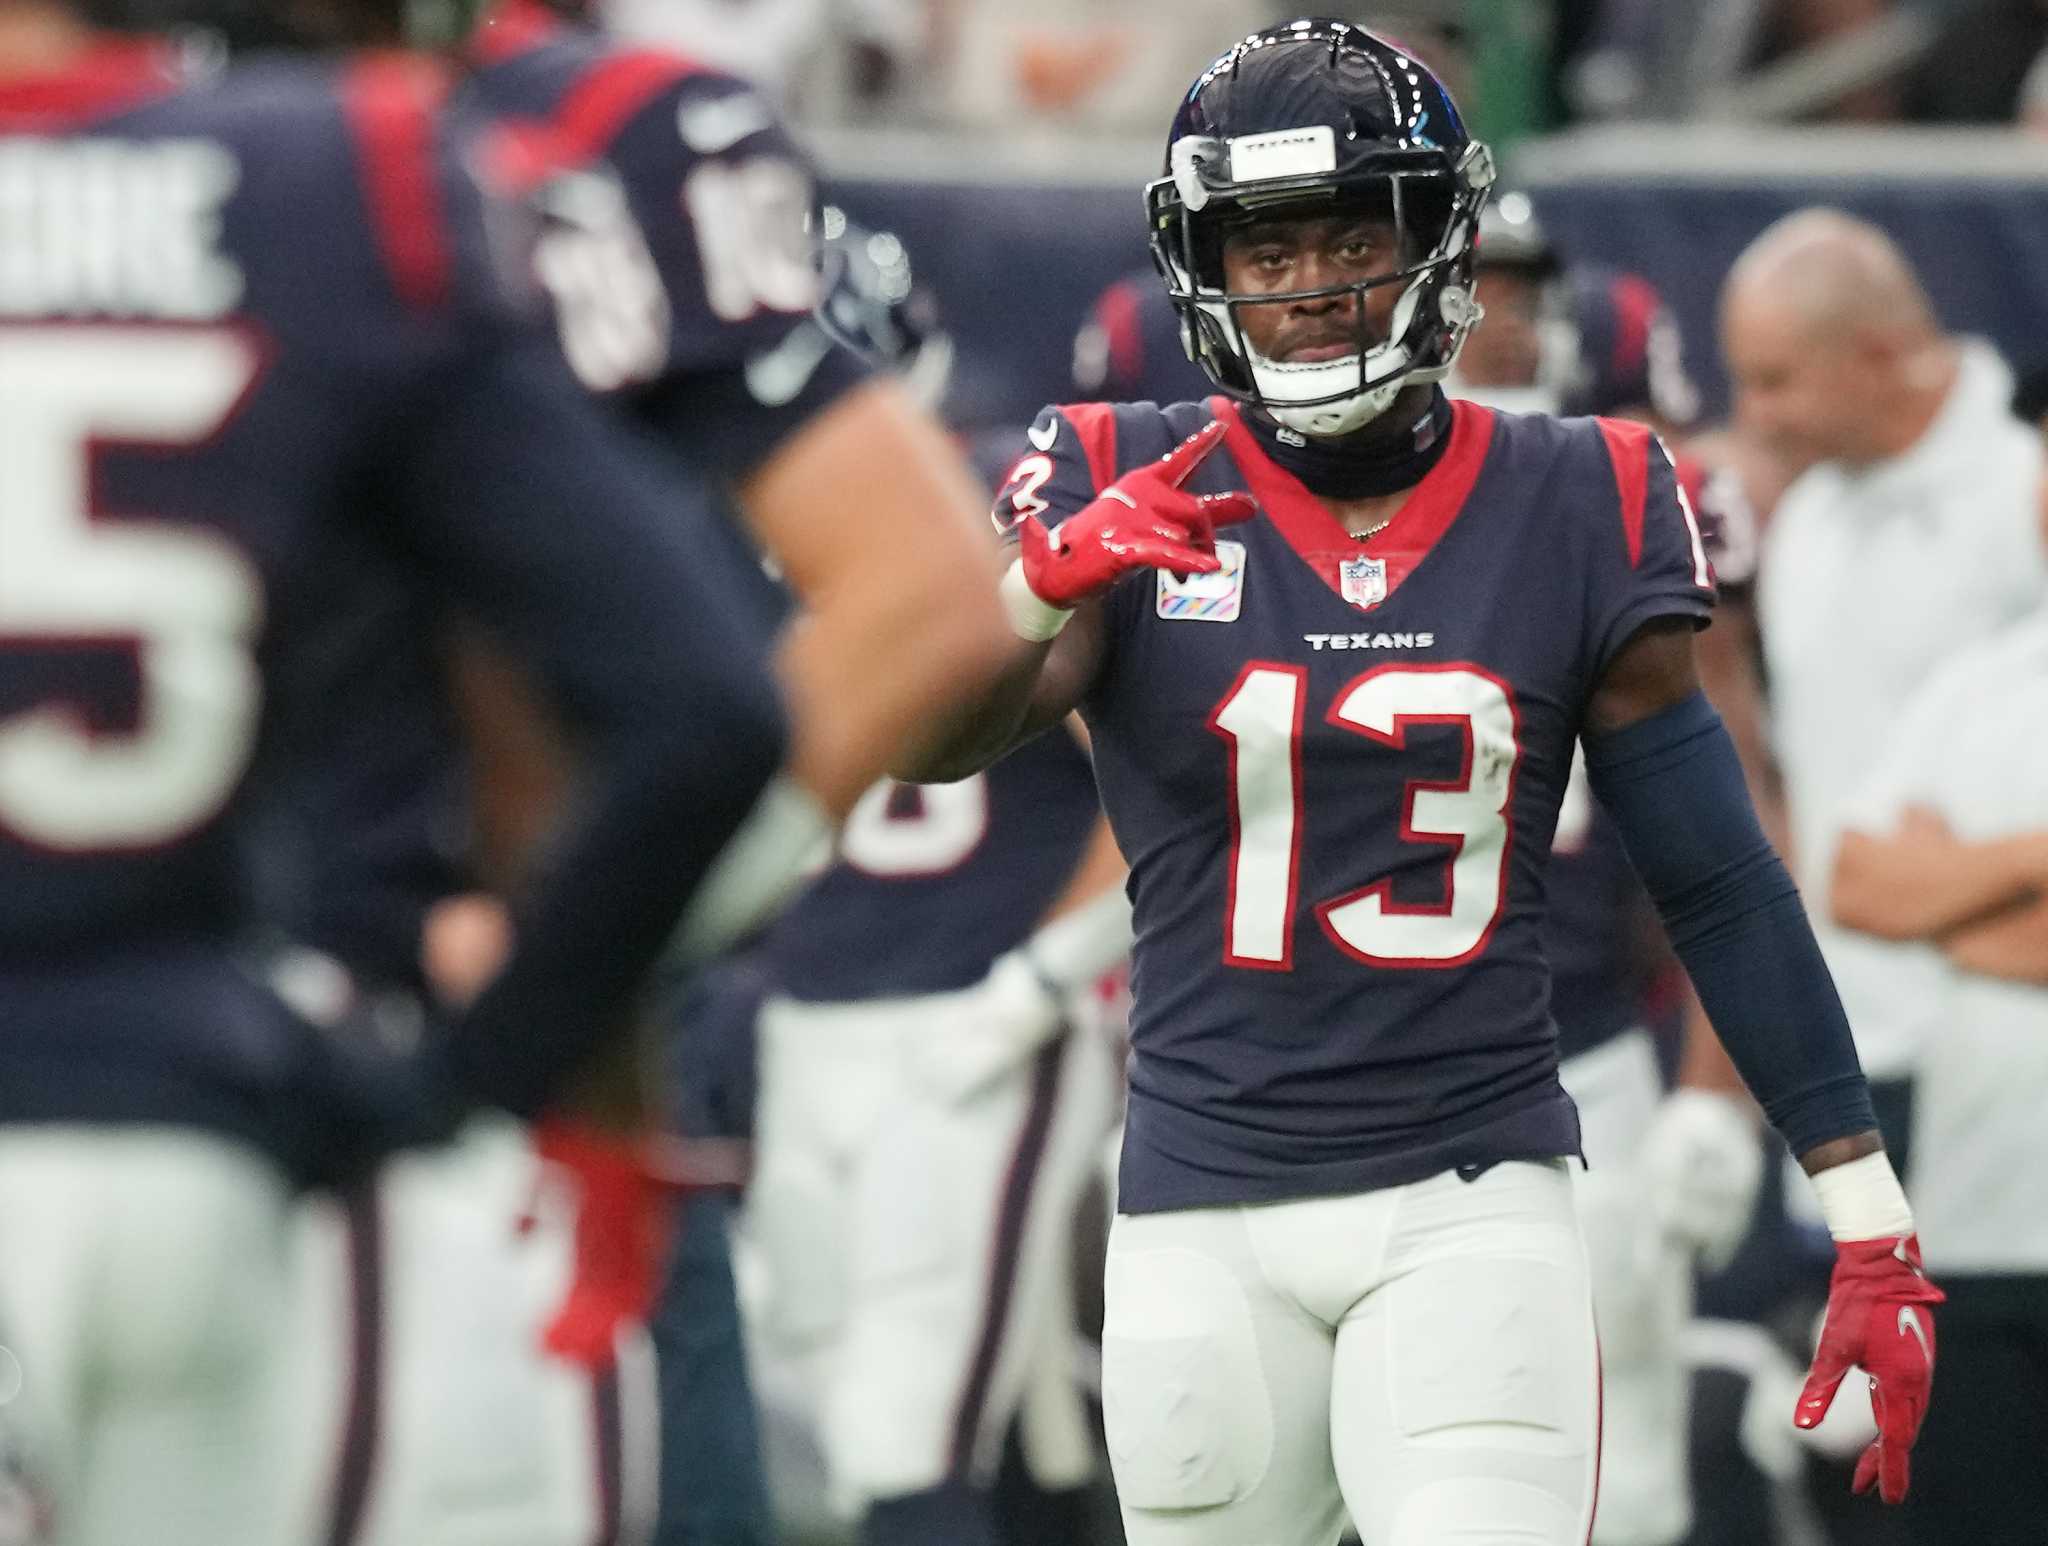 Most receiving yards by a Texans WR through their first 7️⃣